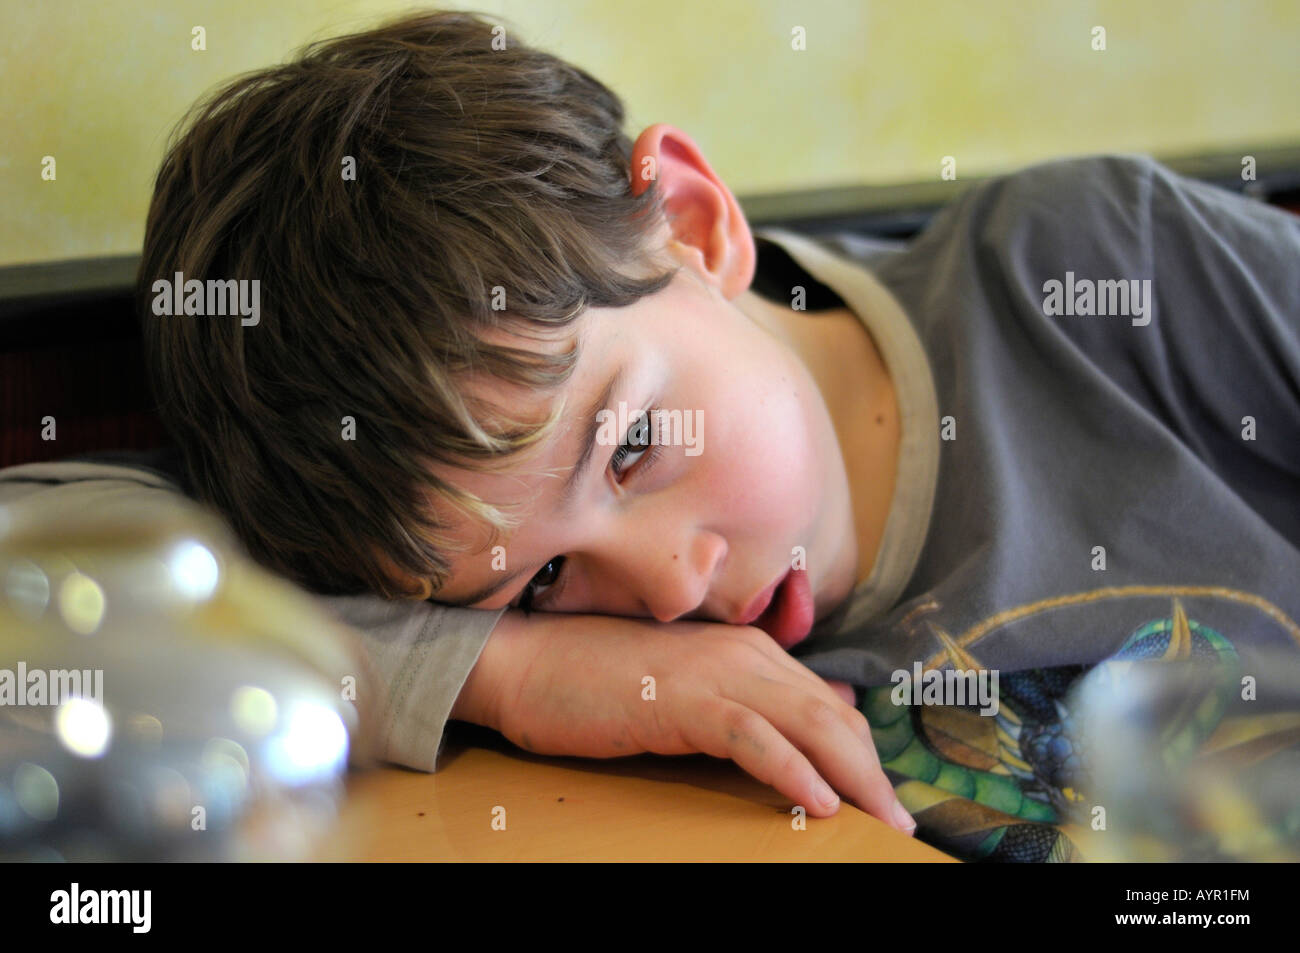 Boy, 9 years old, tired, bored, thoughtful Stock Photo - Alamy